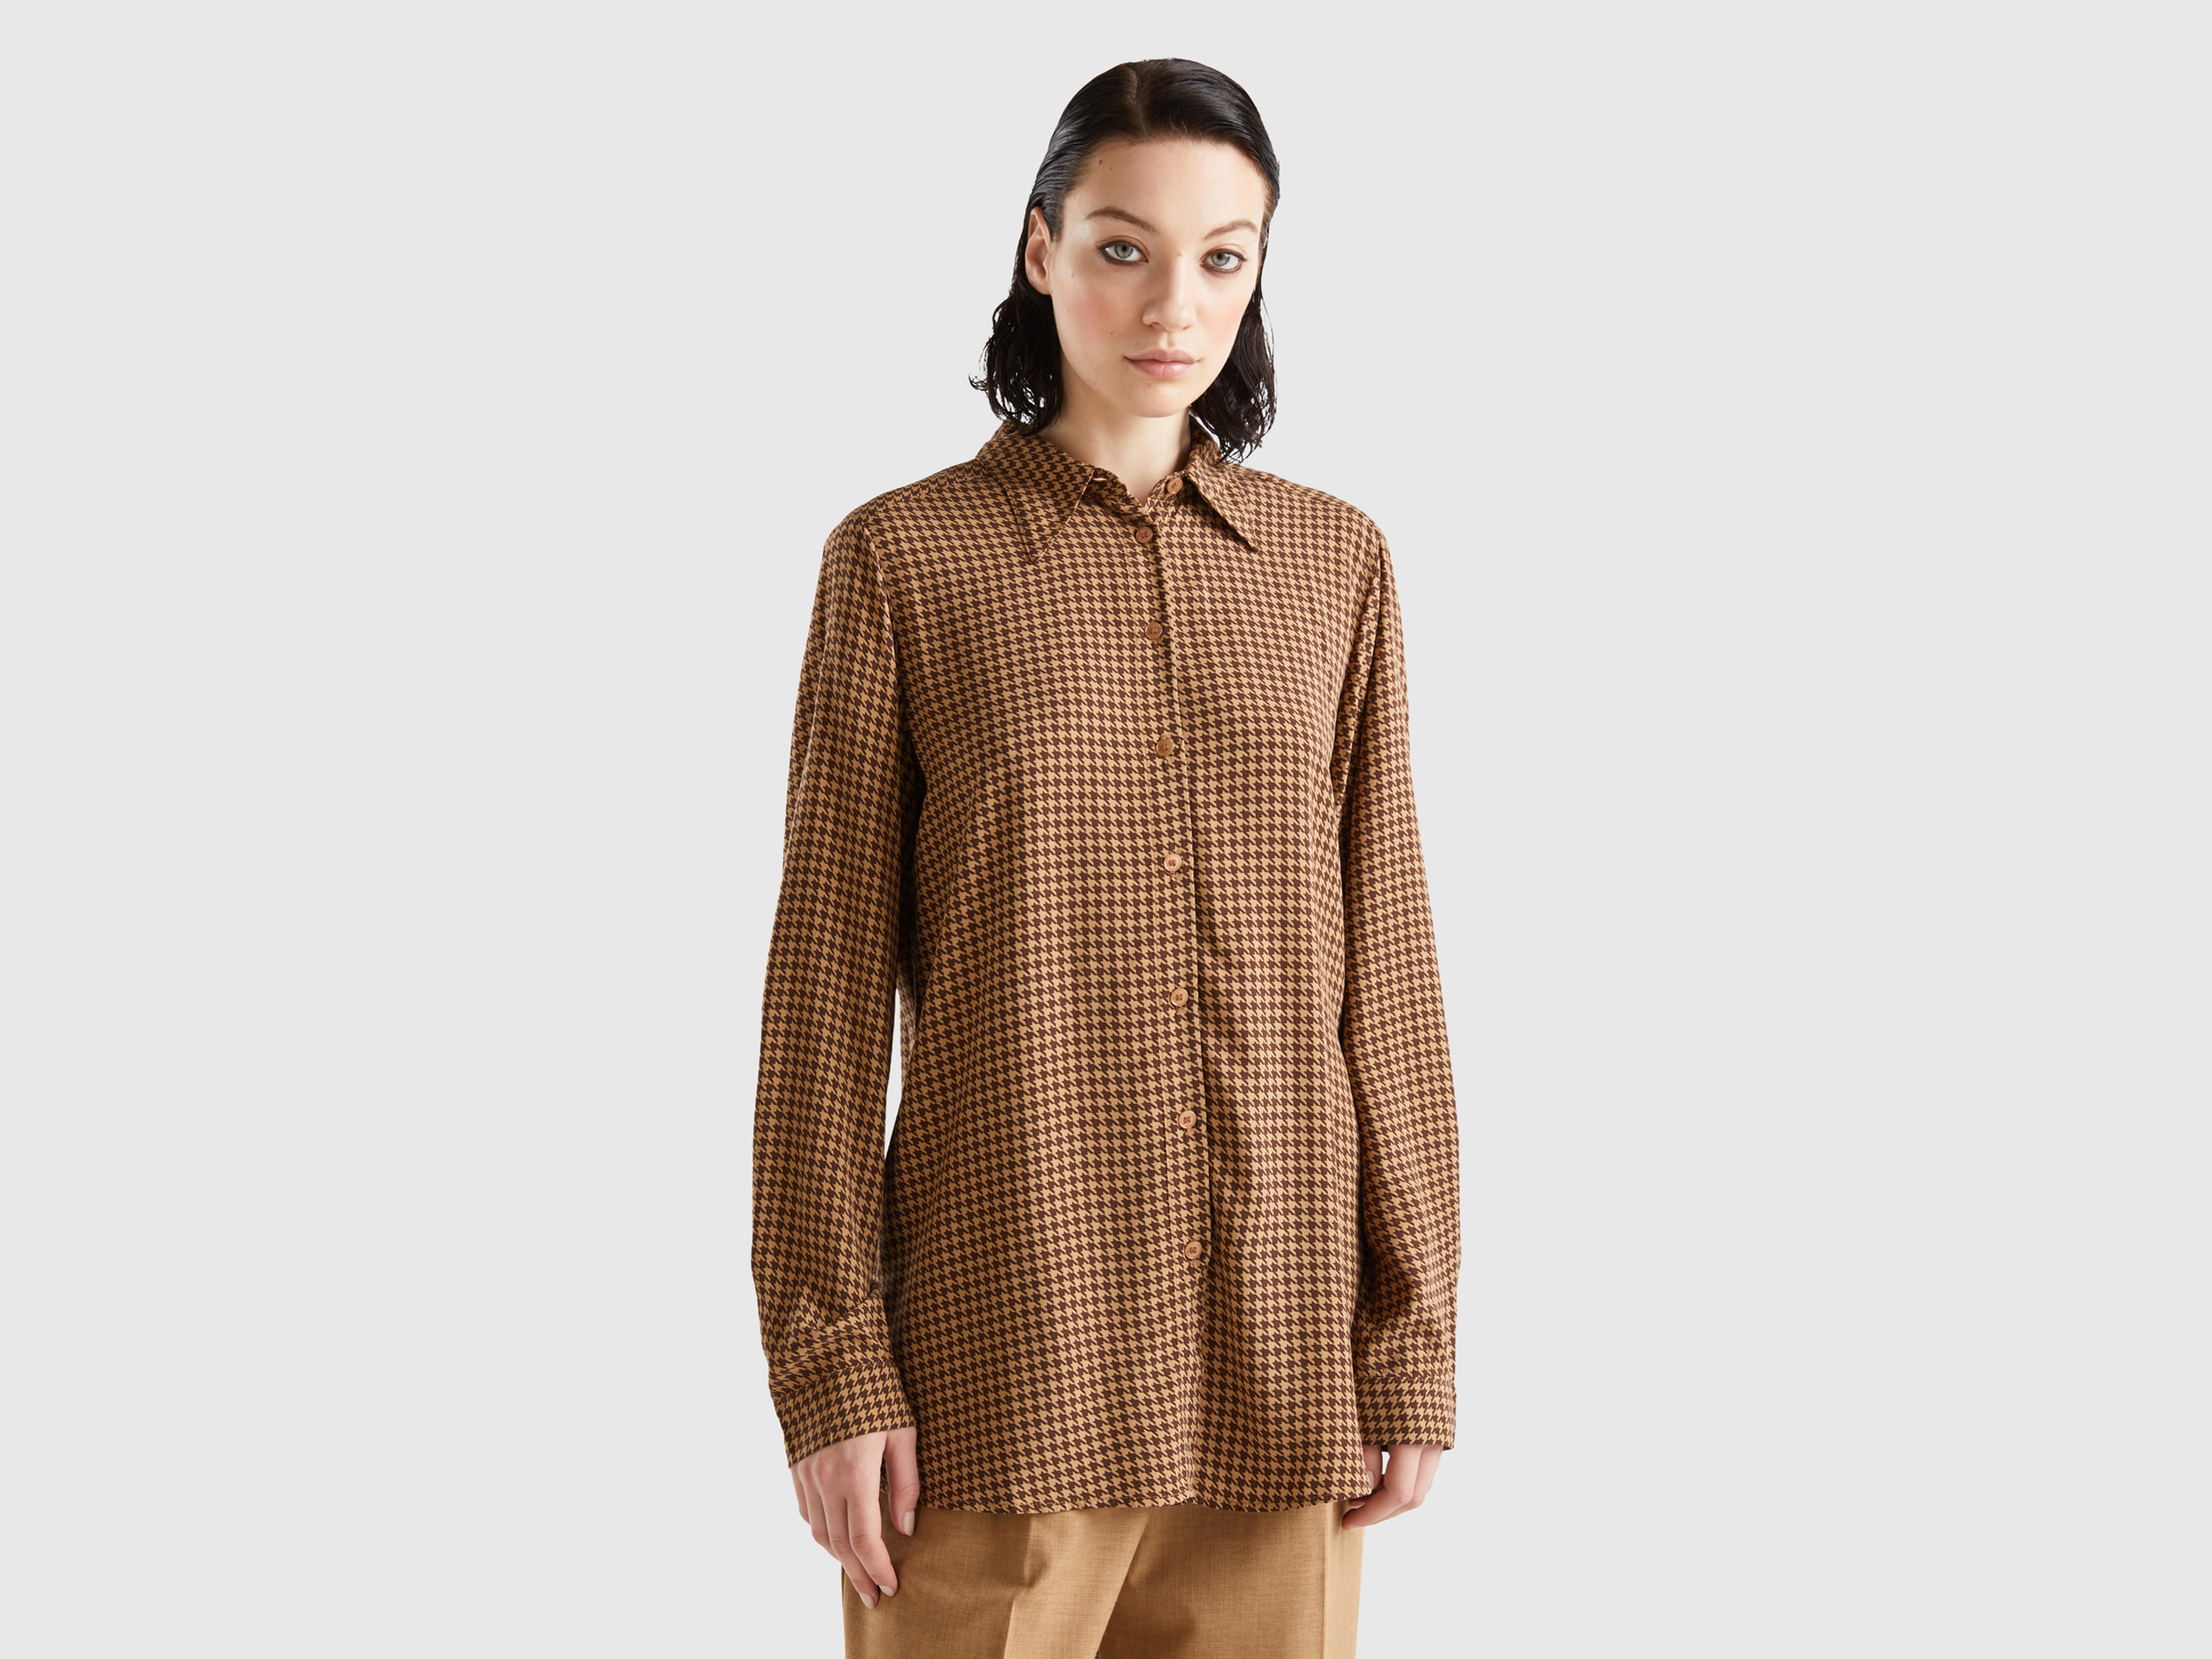 Benetton, Patterned Shirt In Sustainable Viscose, size XL, Brown, Women